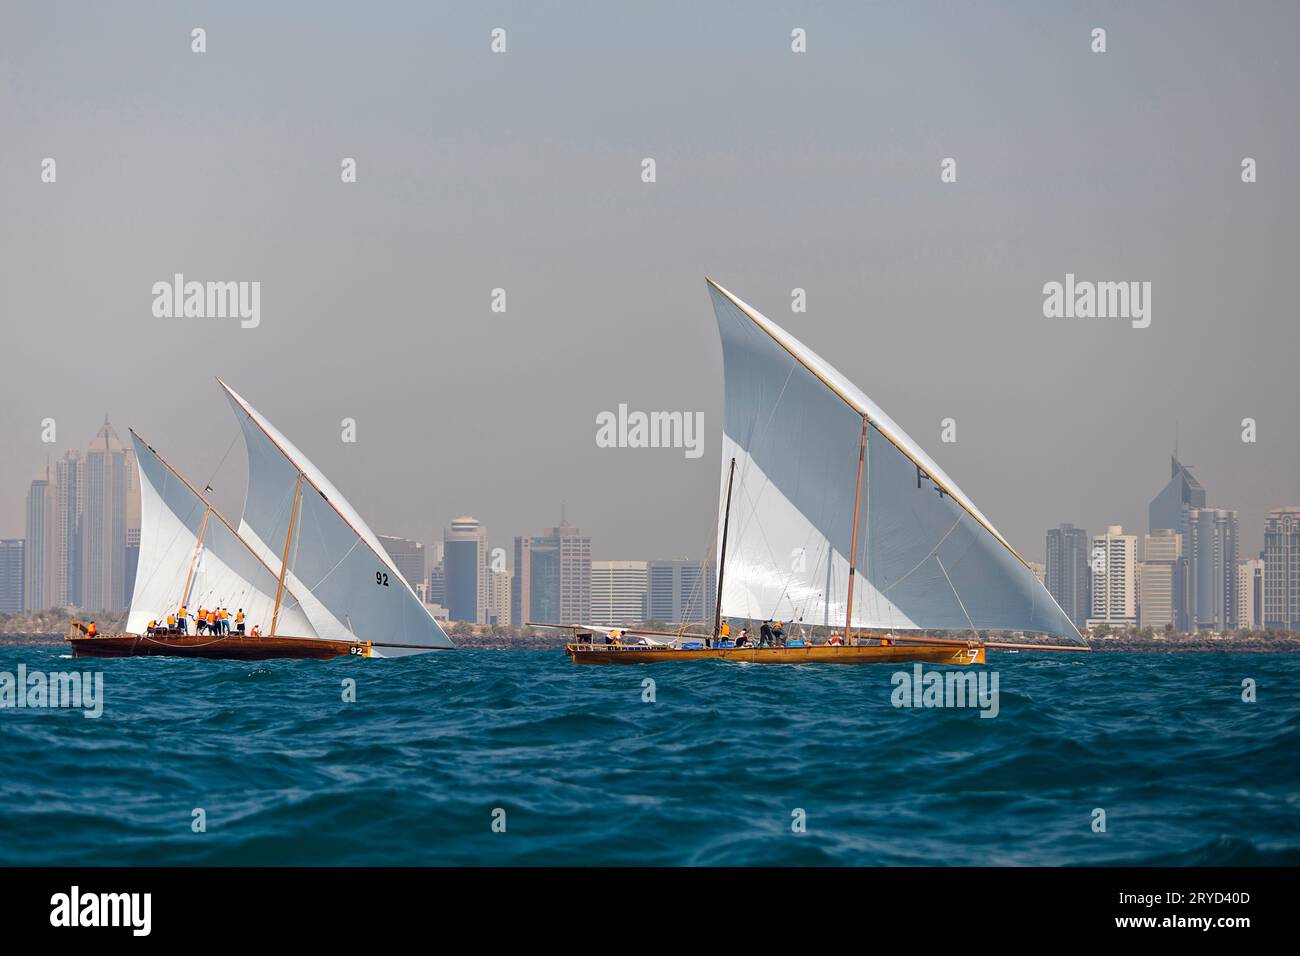 Traditional sailing dhows race back to Abu Dhabi at Ghanada Dhow Sailing Race 60 ft. Final Round Stock Photo